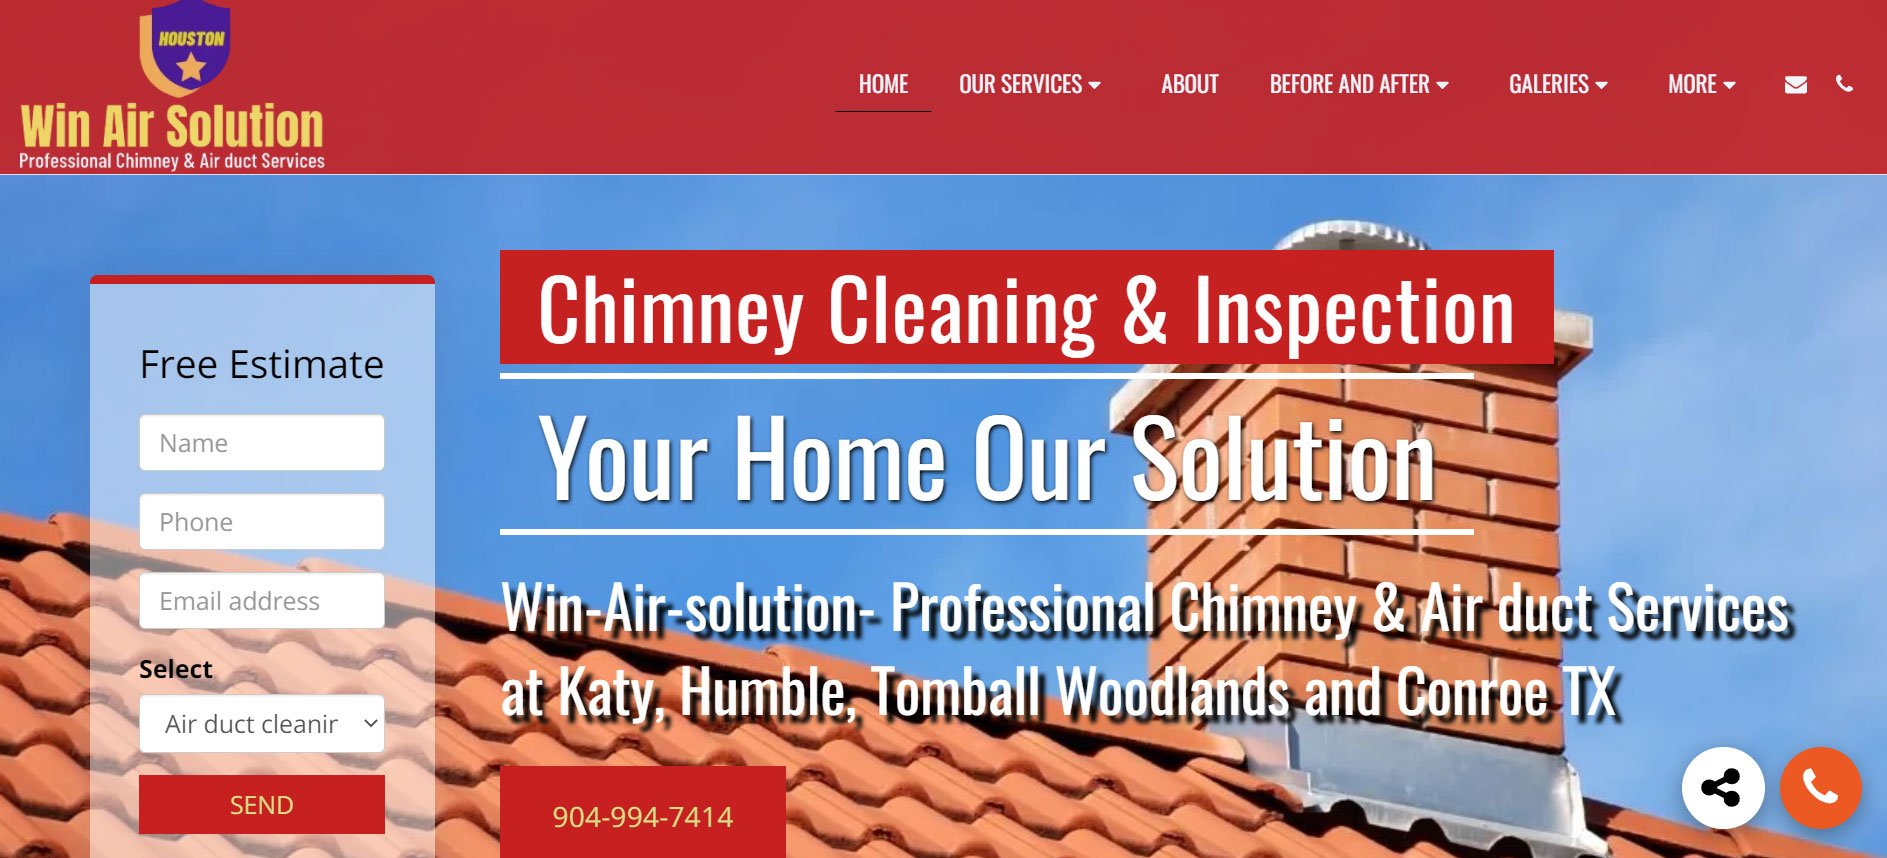 Chimney & Air duct Services